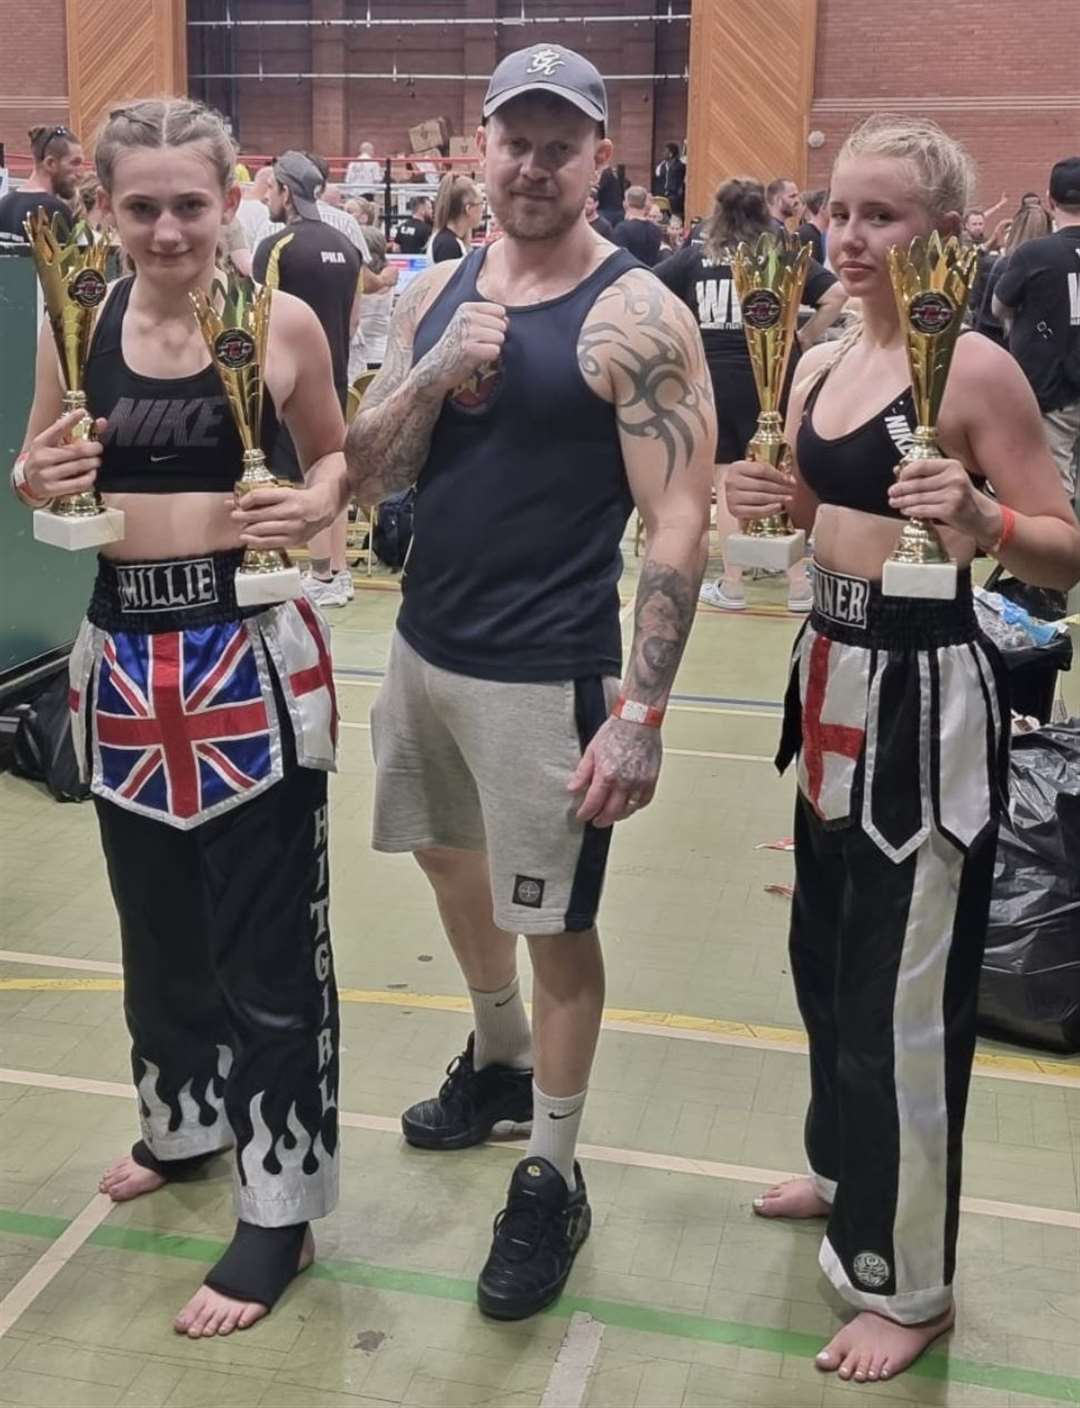 Millie Greenfield and Lexie Gunner, right, pictured with Paul Haworth, were in winning form once again for Star Kickboxing and Boxing Gym